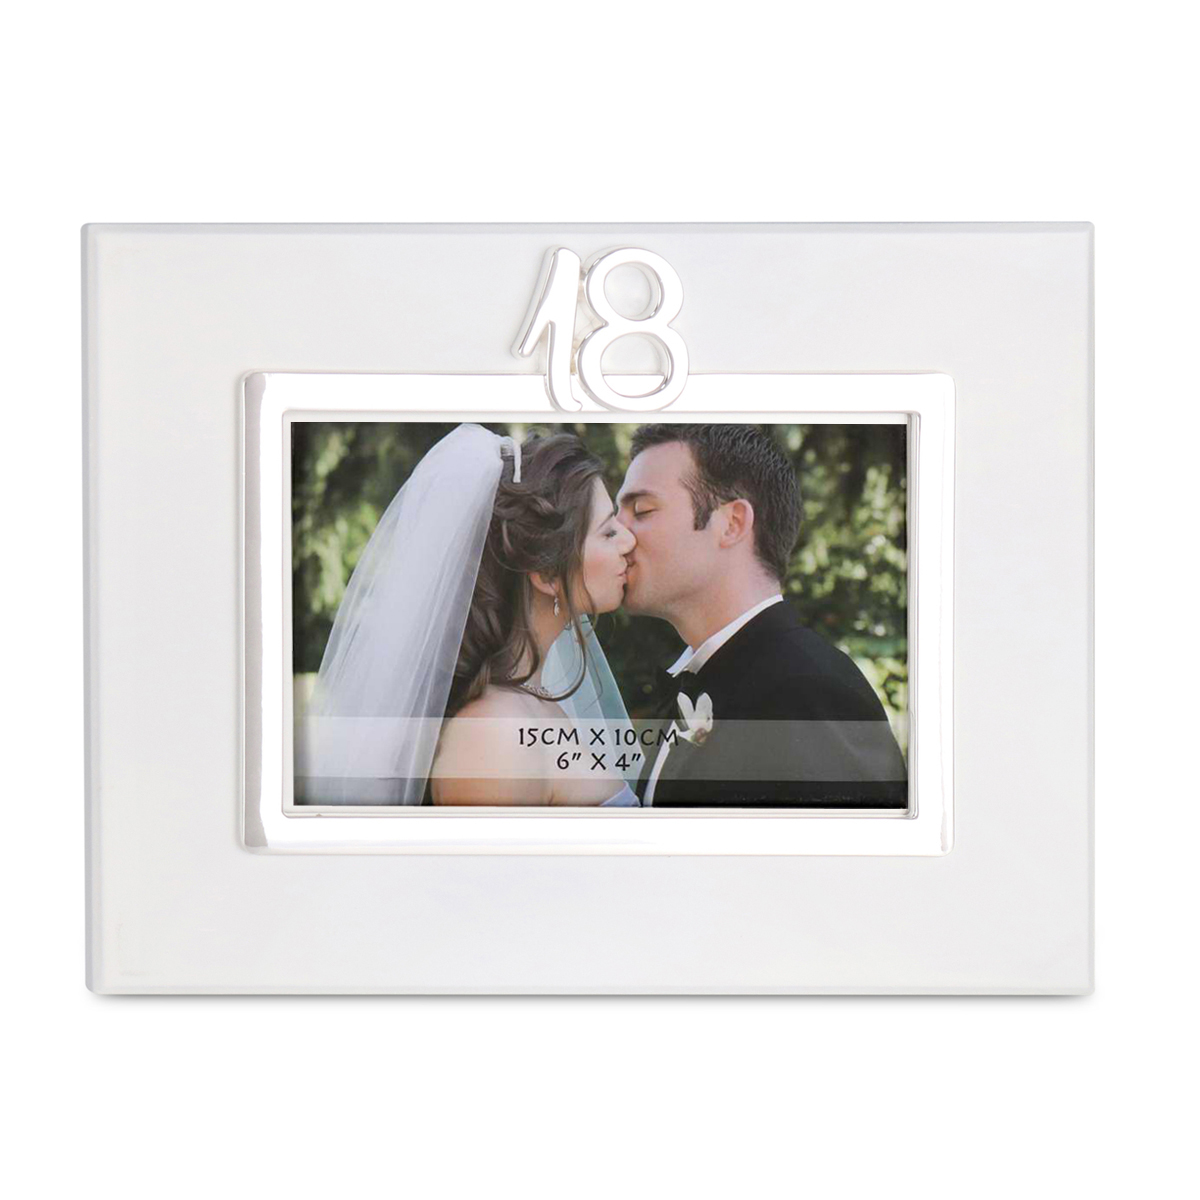 The number 18 wooden frame picture frame